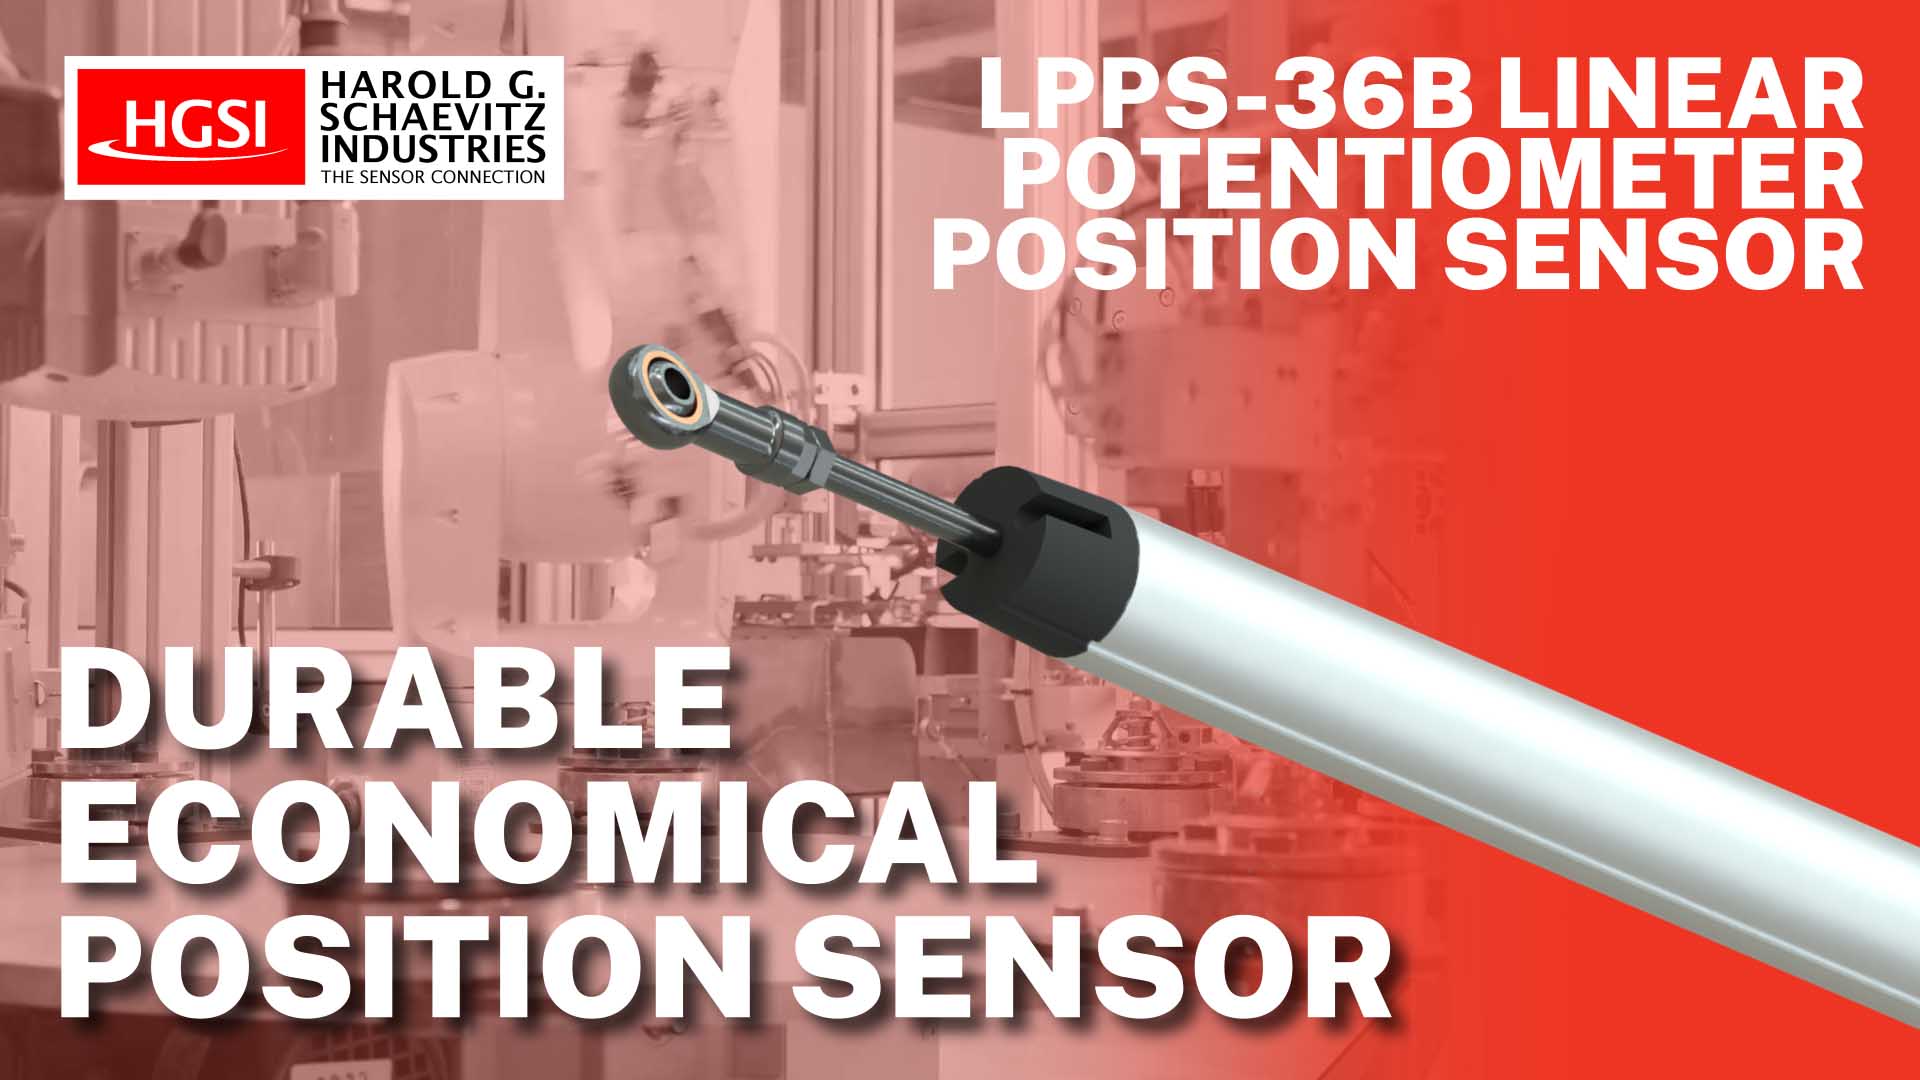 Overview of LPPS-36B Series Linear Potentiometer Position Sensor